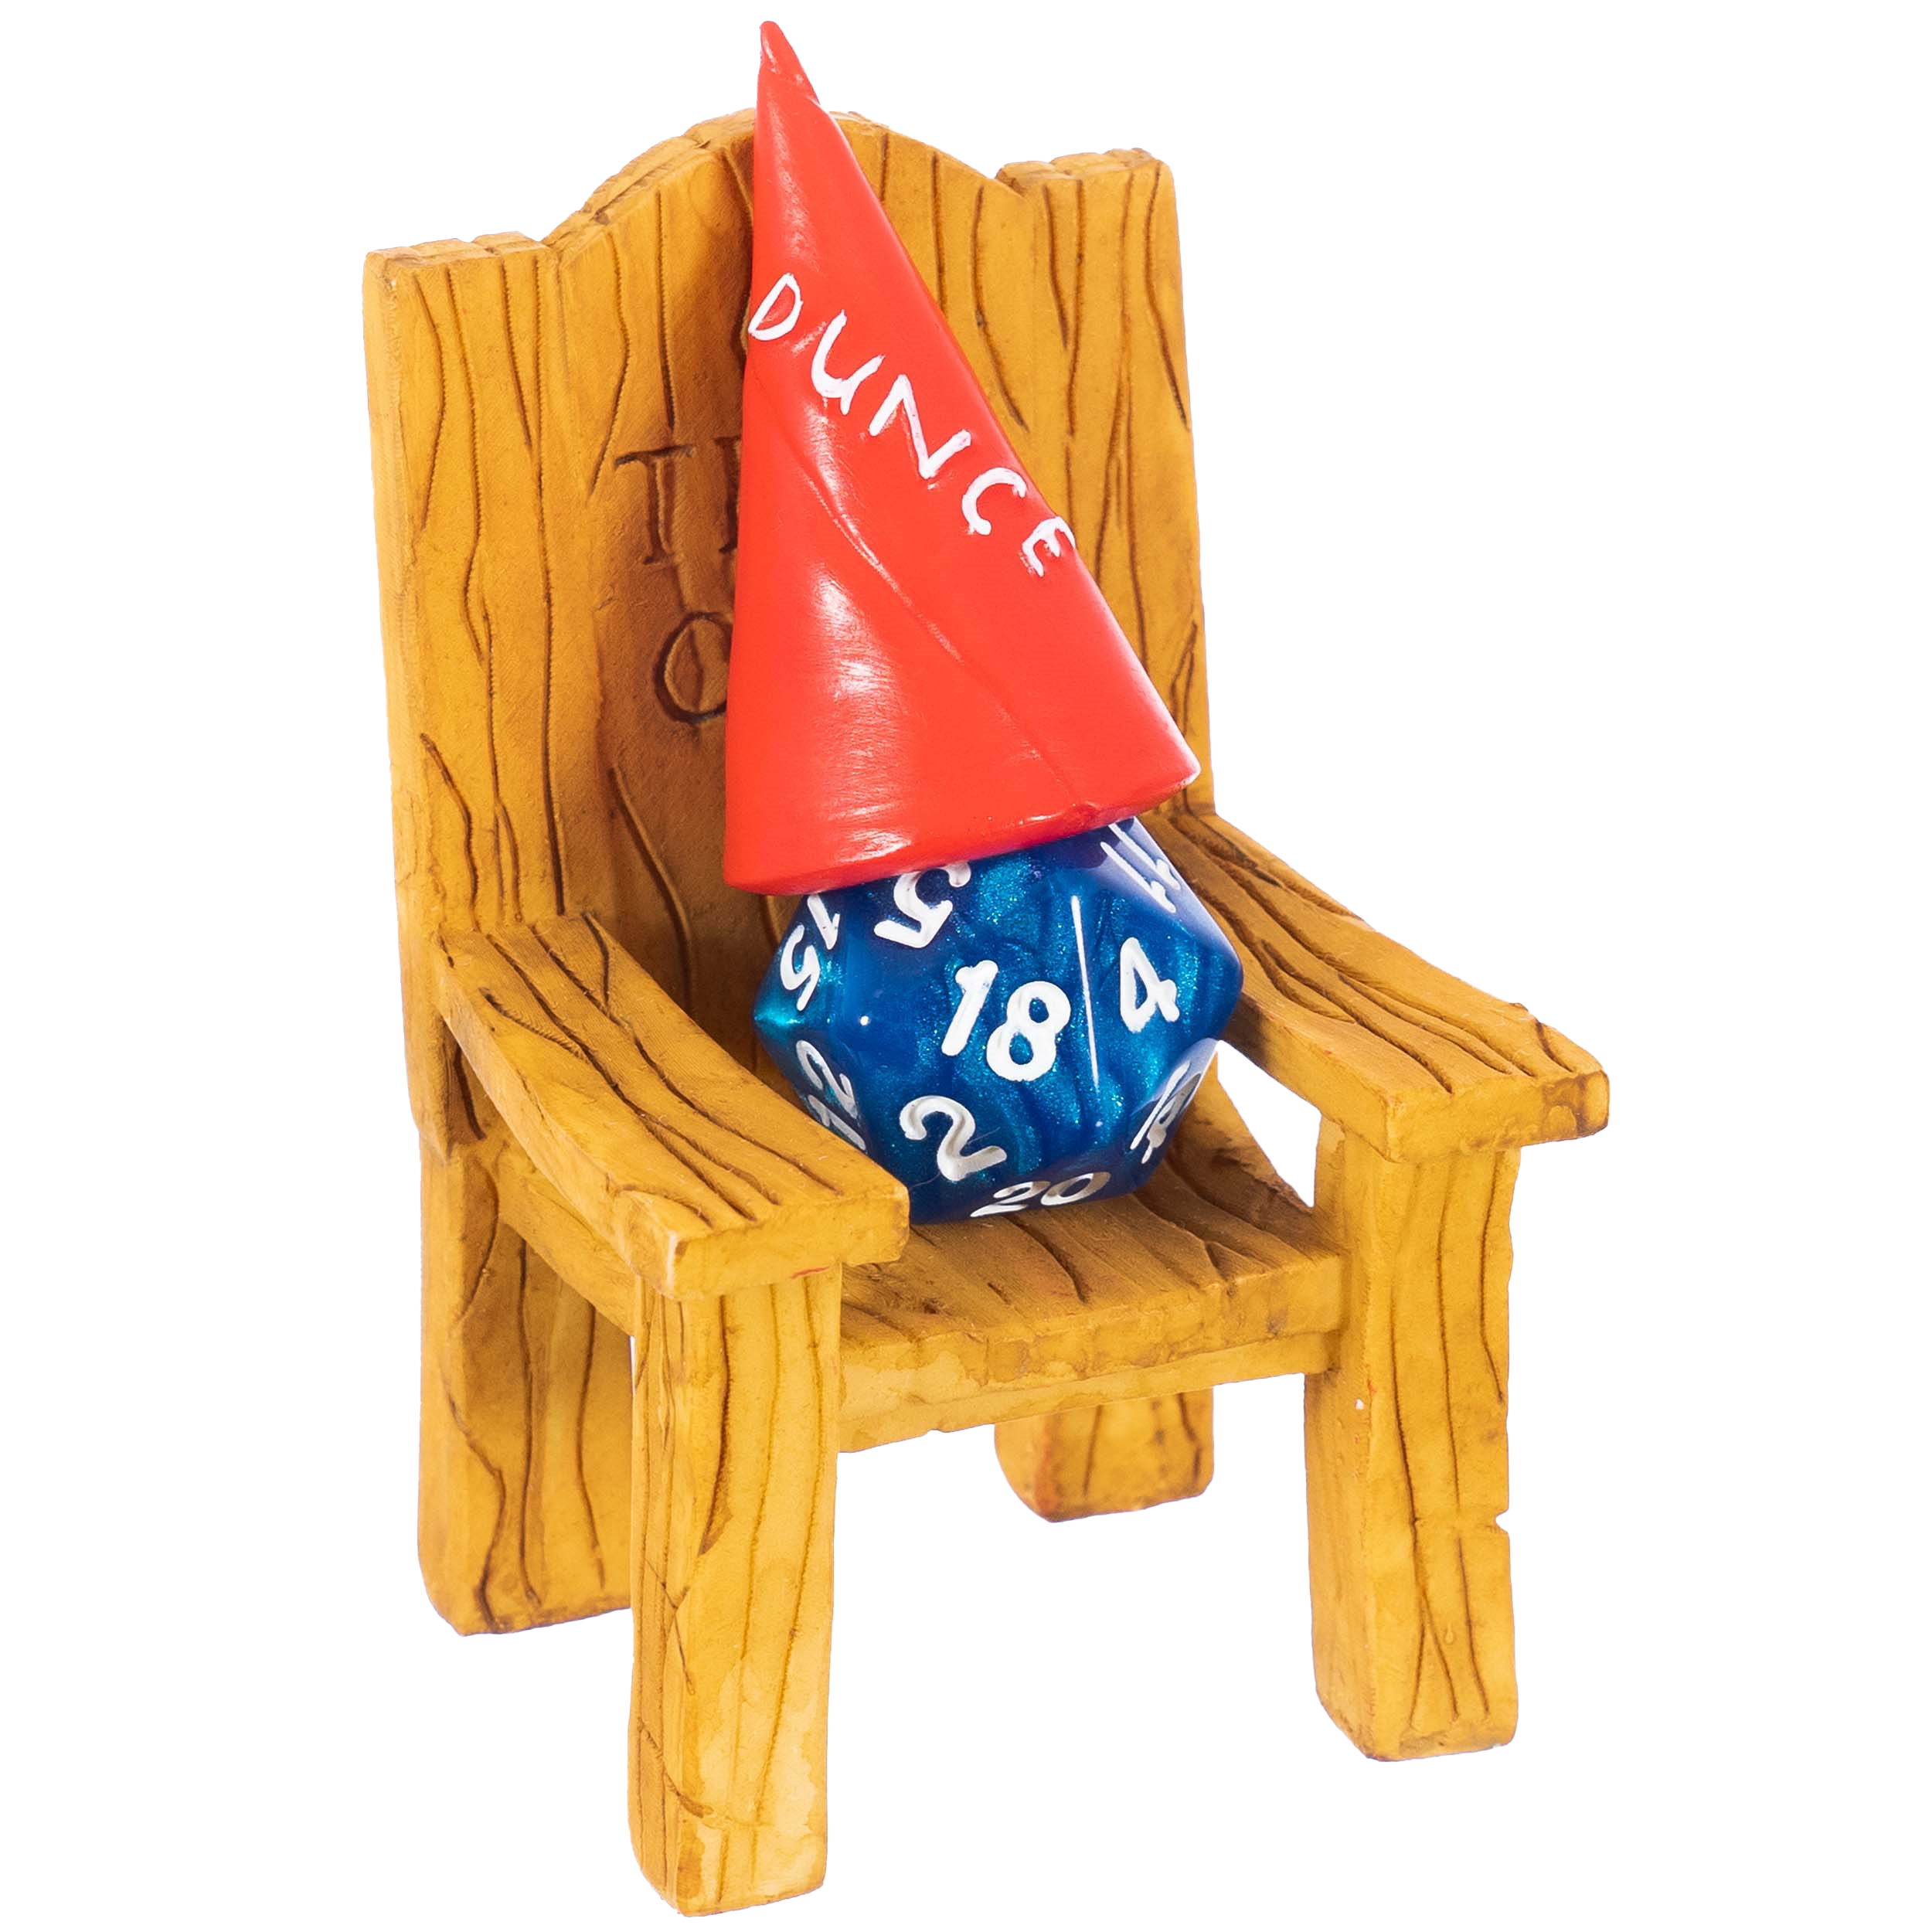 Wholesale of Dice Jail Chair & Dunce Hat